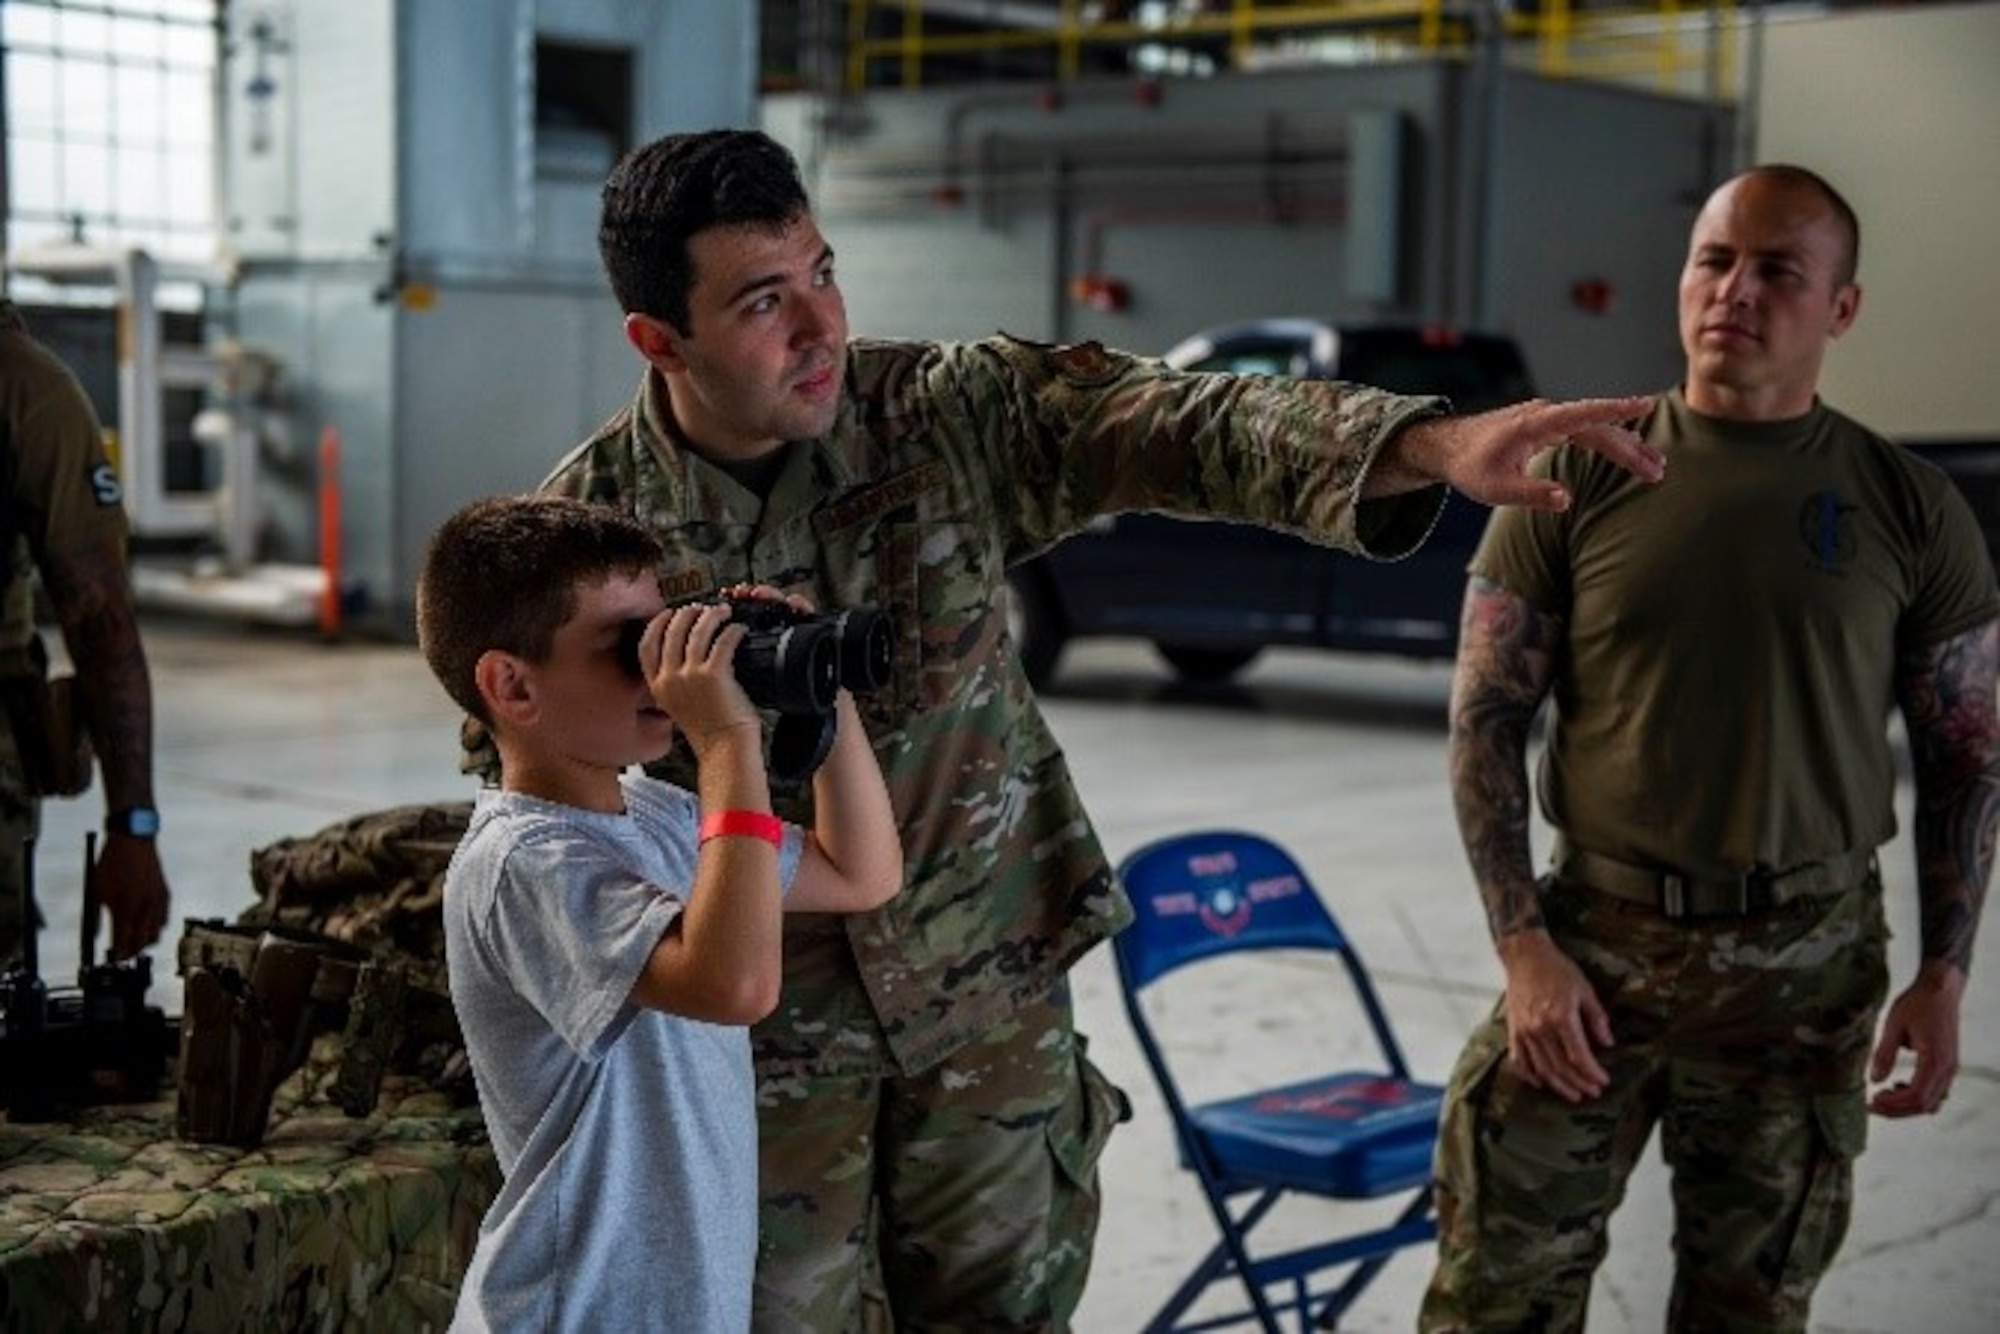 An 88th Security Forces Squadron Airman instructs a child using binoculars as part of Operation KUDOS on July 28 at Wright-Patterson Air Force Base, Ohio. The annual Kids Understanding Deployment Operations event is meant to teach children in military families about deployments through engaging activities. (U.S. Air Force photo by Airman 1st Class James Johnson)